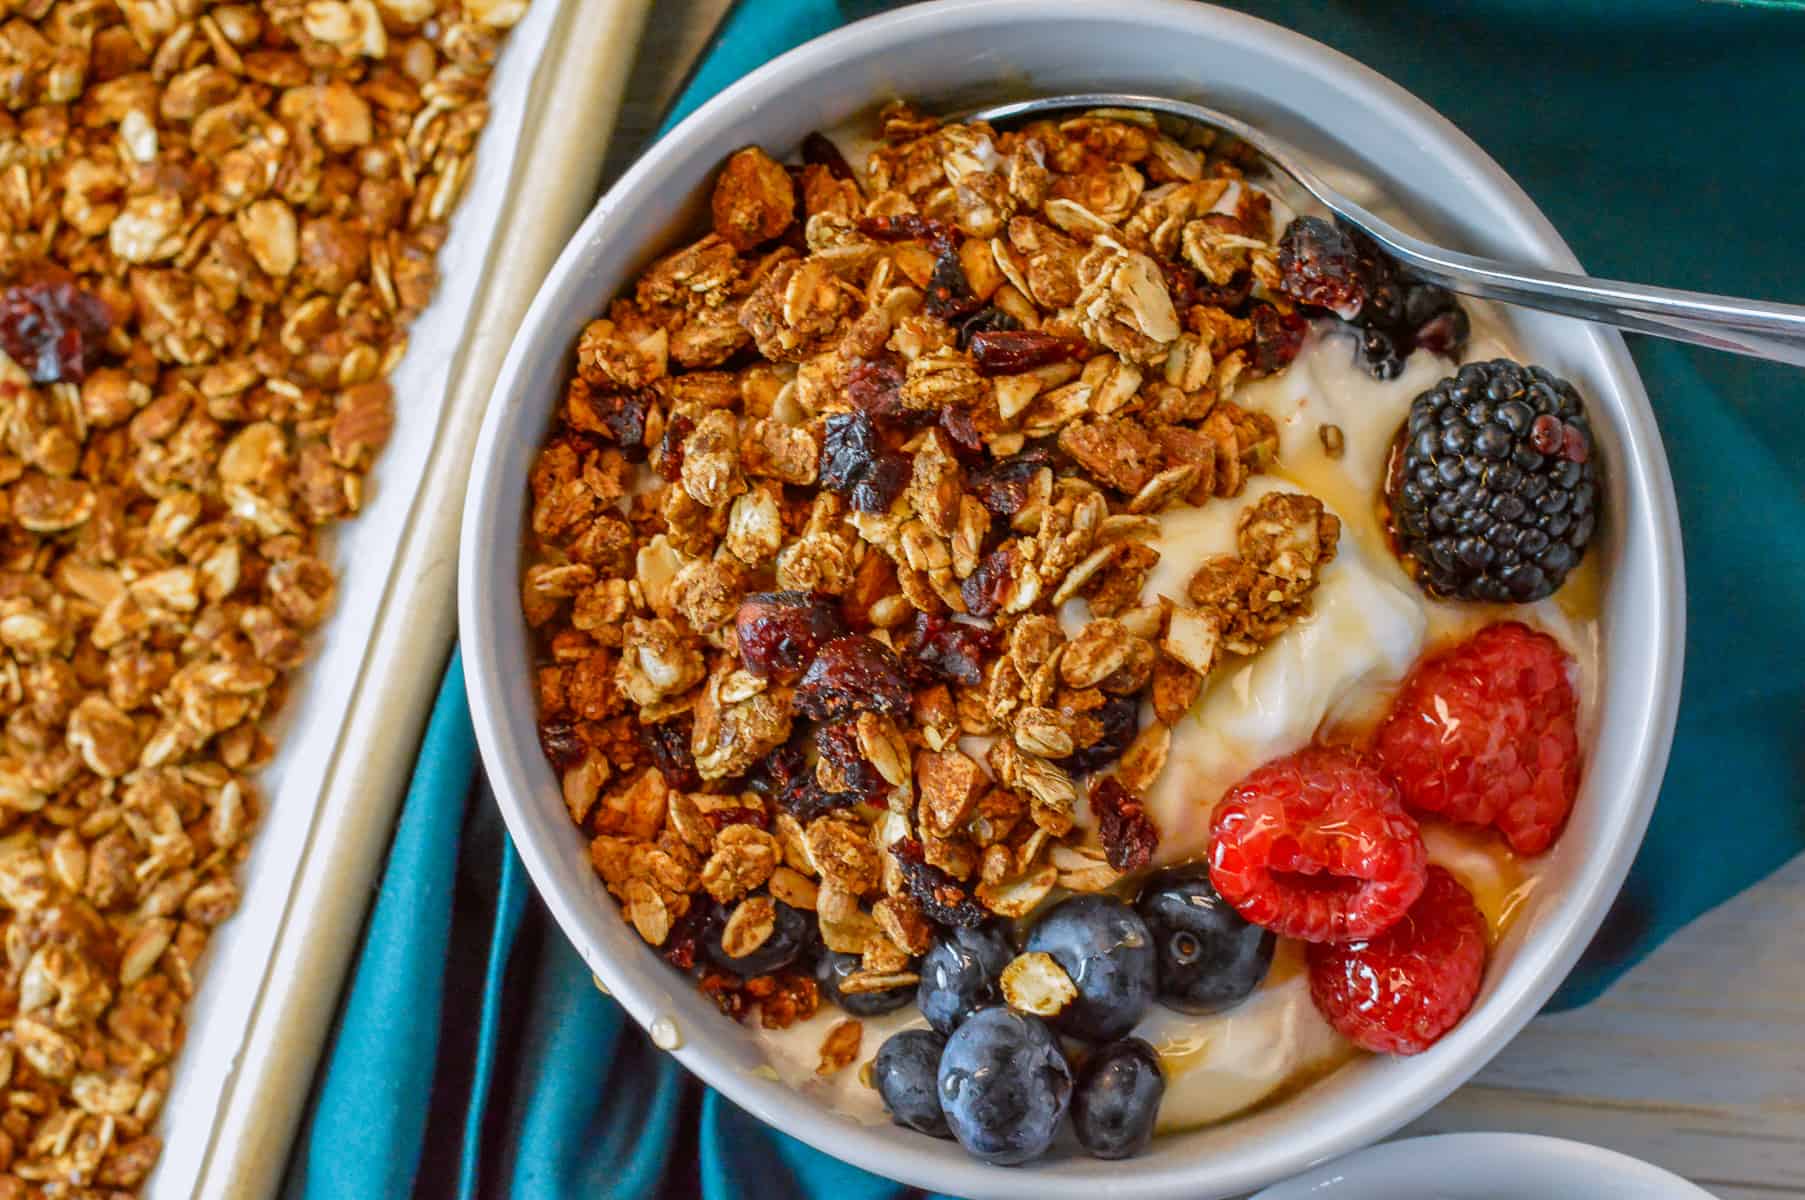 Over-top view of white bowl with yogurt, honey, berries and homemade granola on teal napkin with sheet pan of granola on the side.